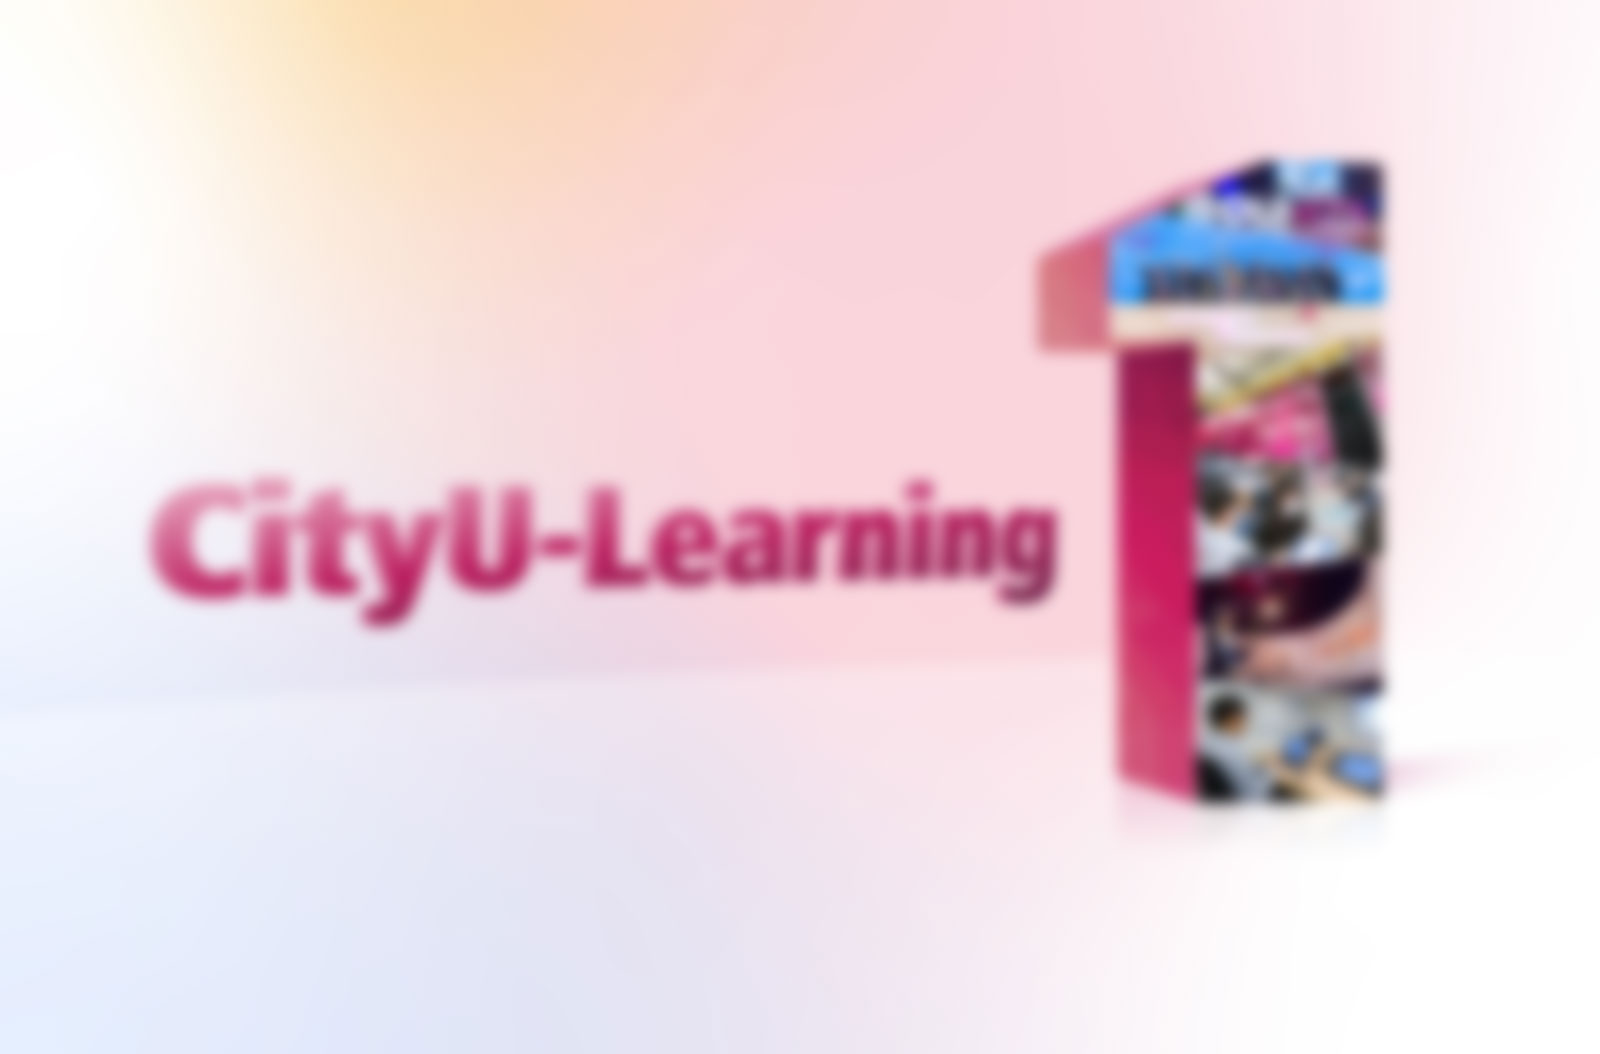 1st anniversary of CityU-Learning – pioneering a new era in online teaching